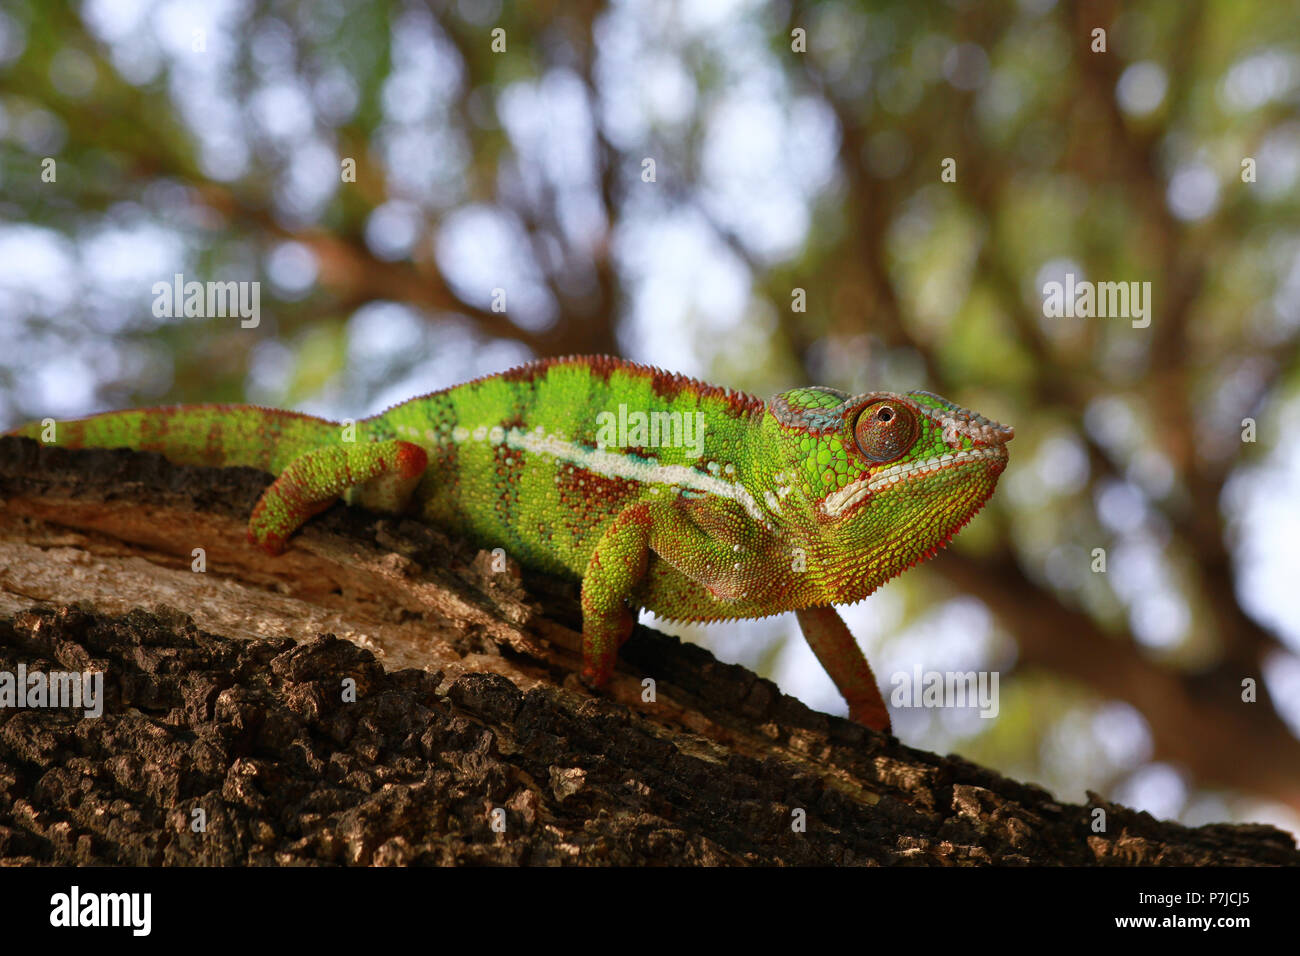 Chameleon panther on branch Stock Photo